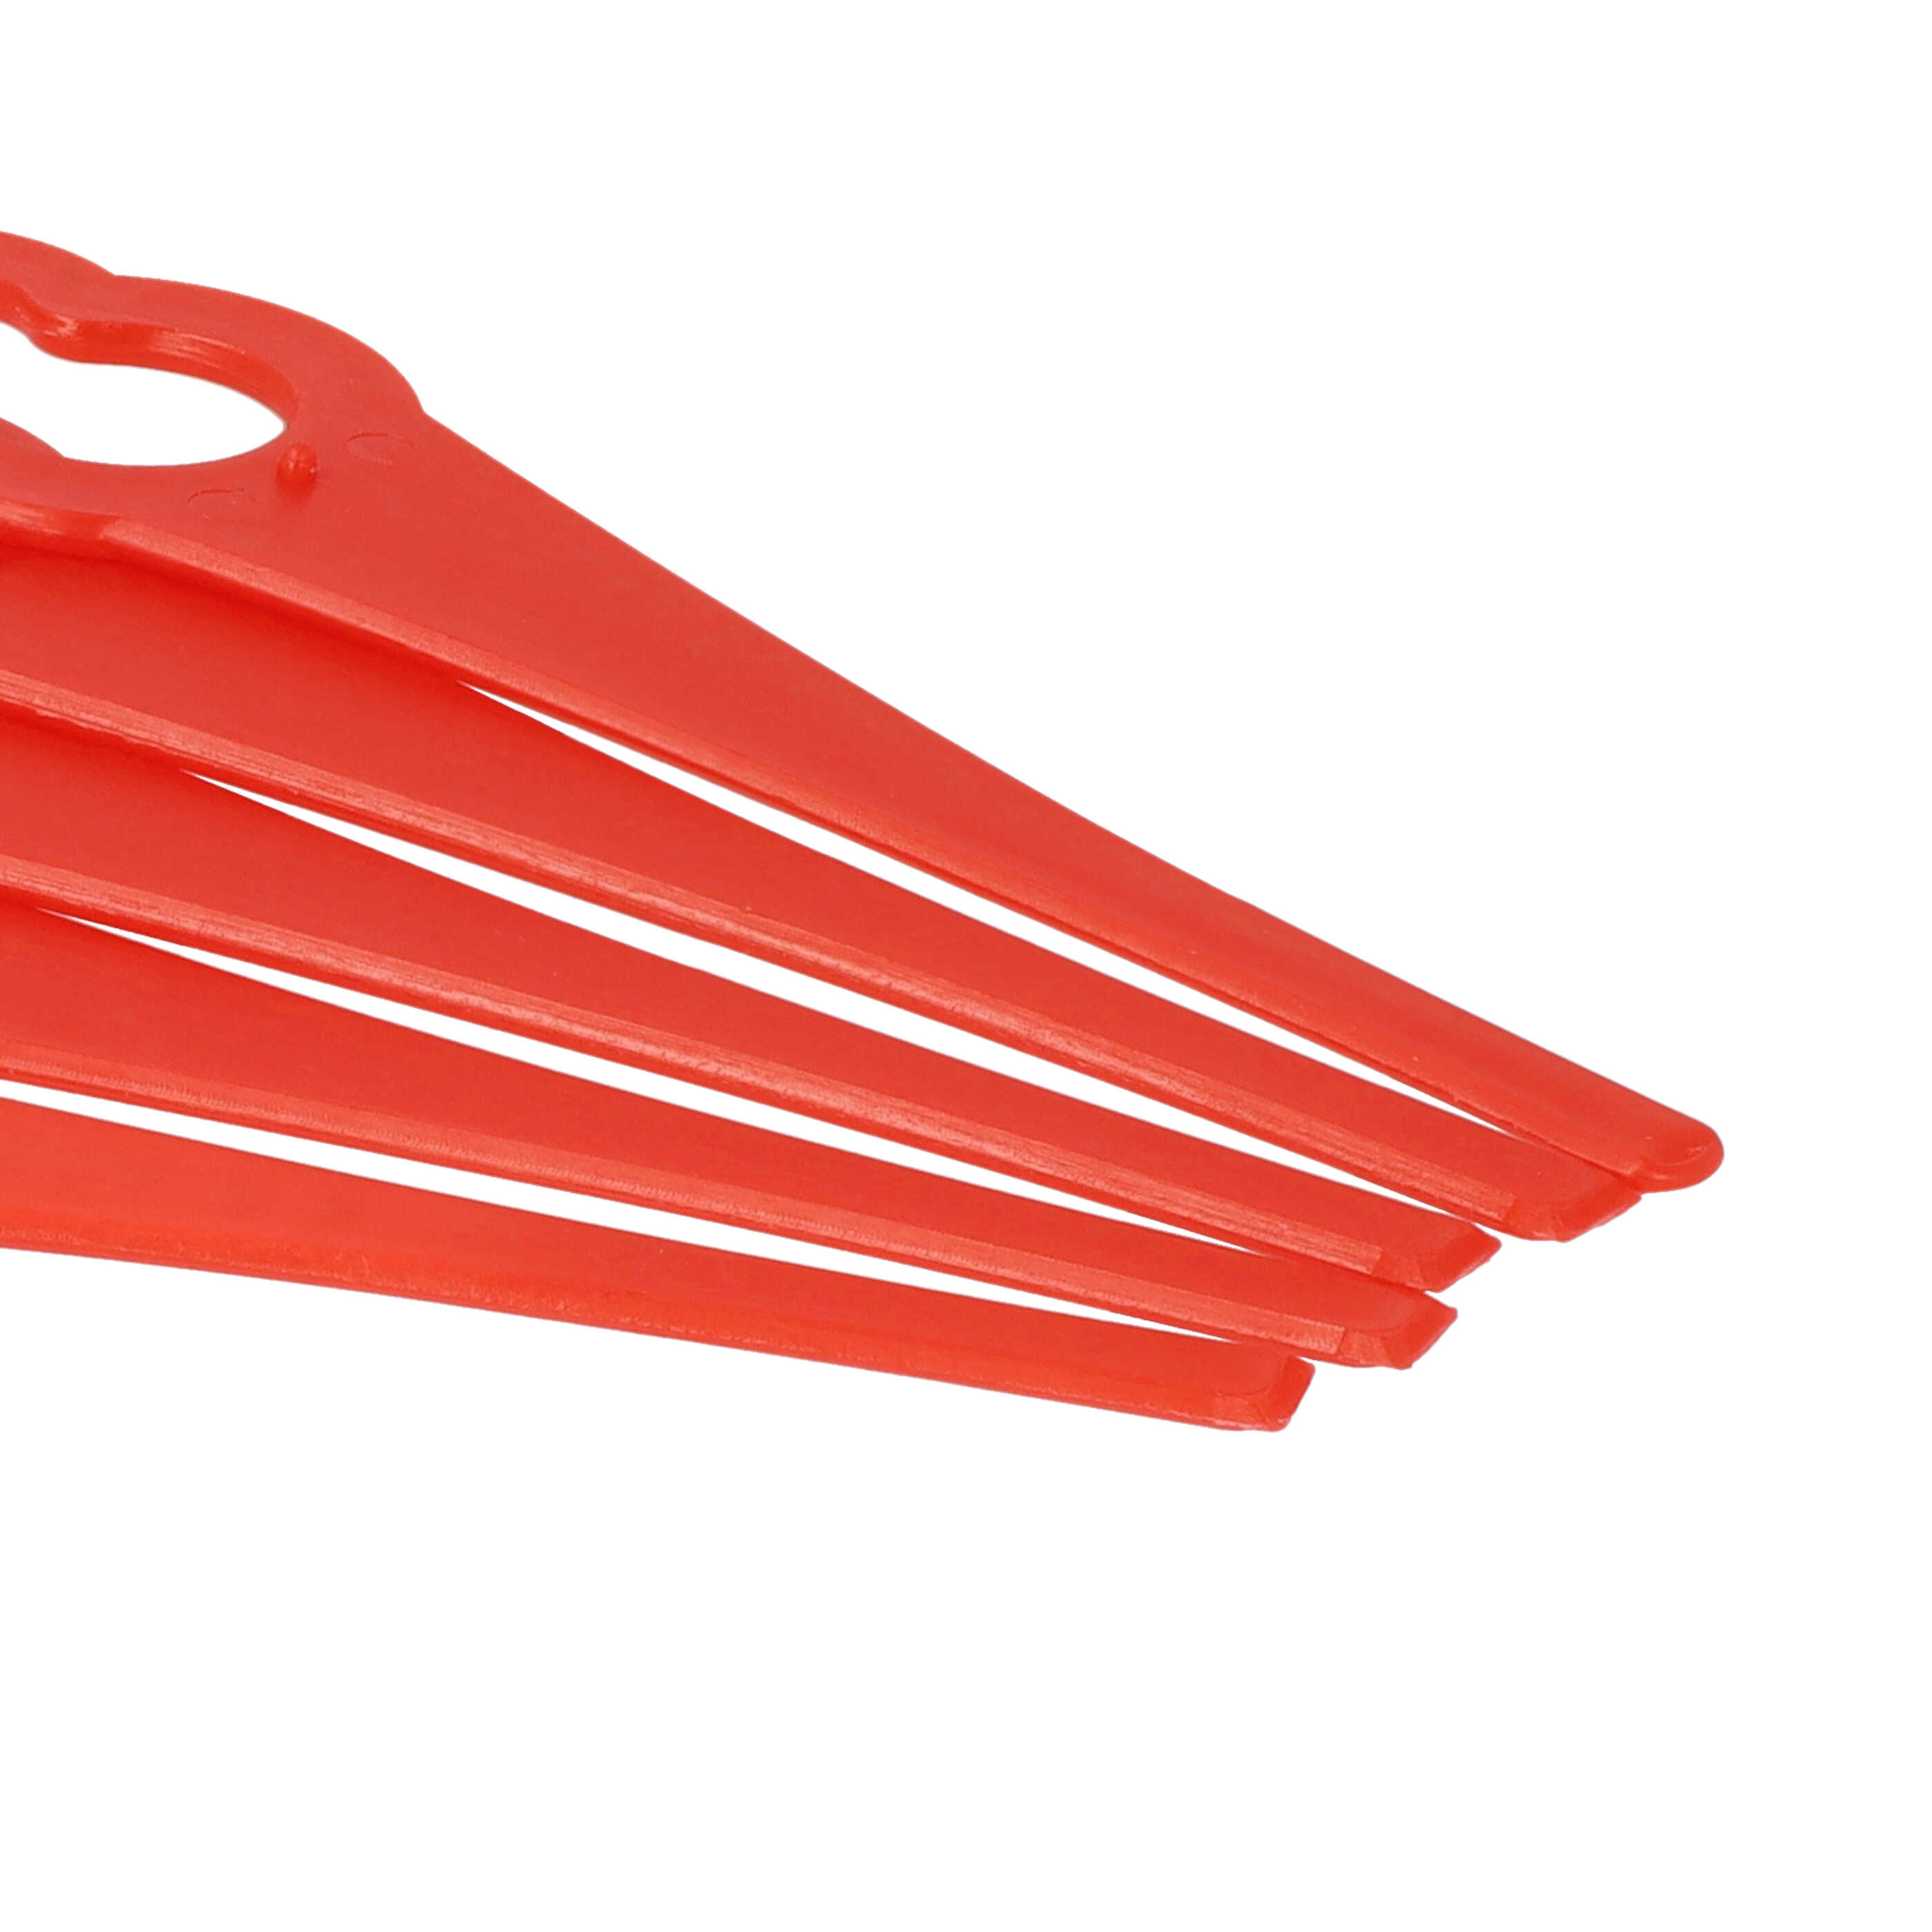 5x Exchange Blade replaces ALM BQ026 for Cordless Strimmer etc. - nylon / plastic, red